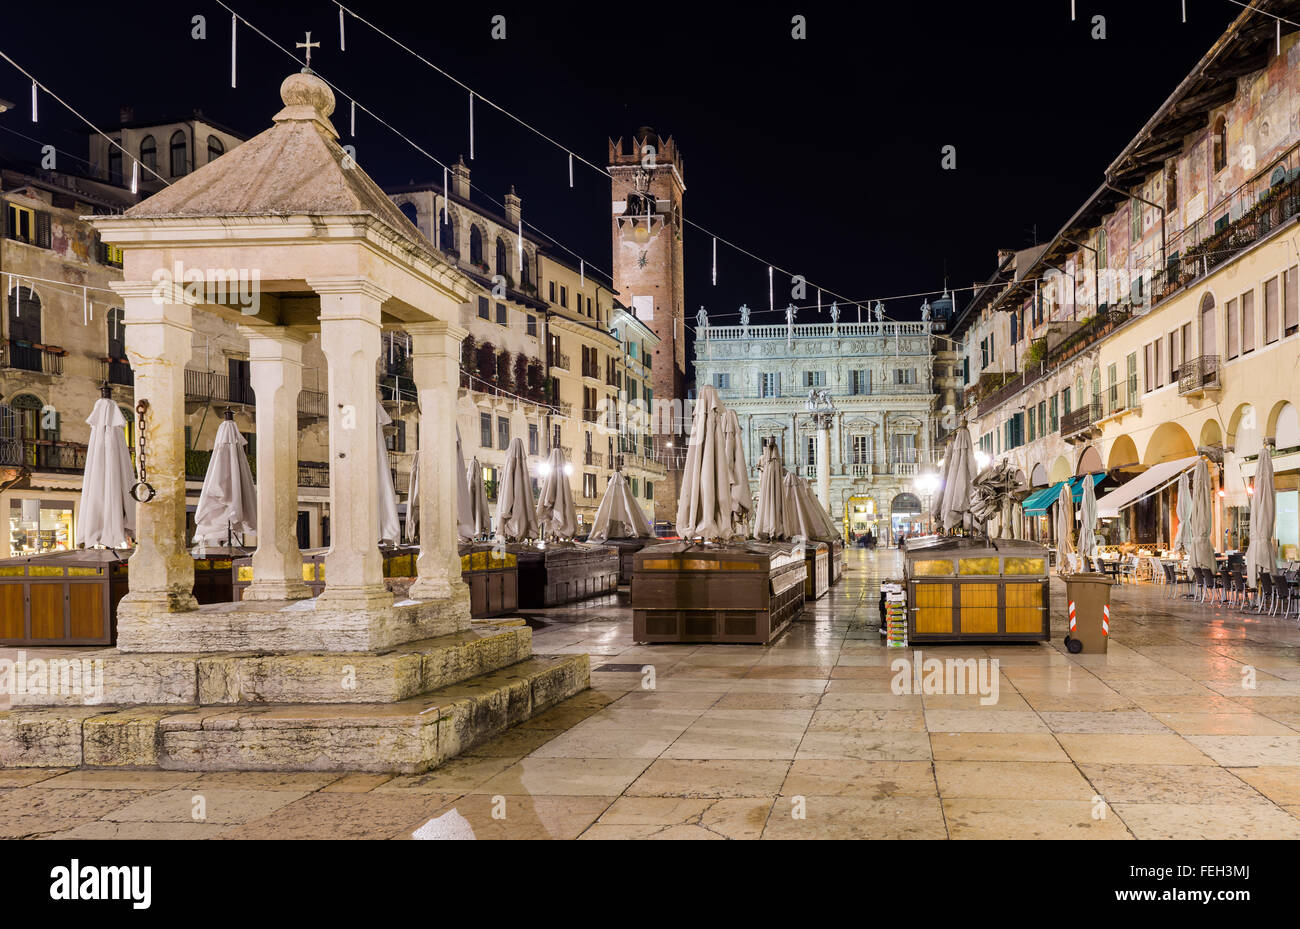 Nightview of Piazza delle Erbe, also called Market Square, where the forum was during the roman empire Stock Photo